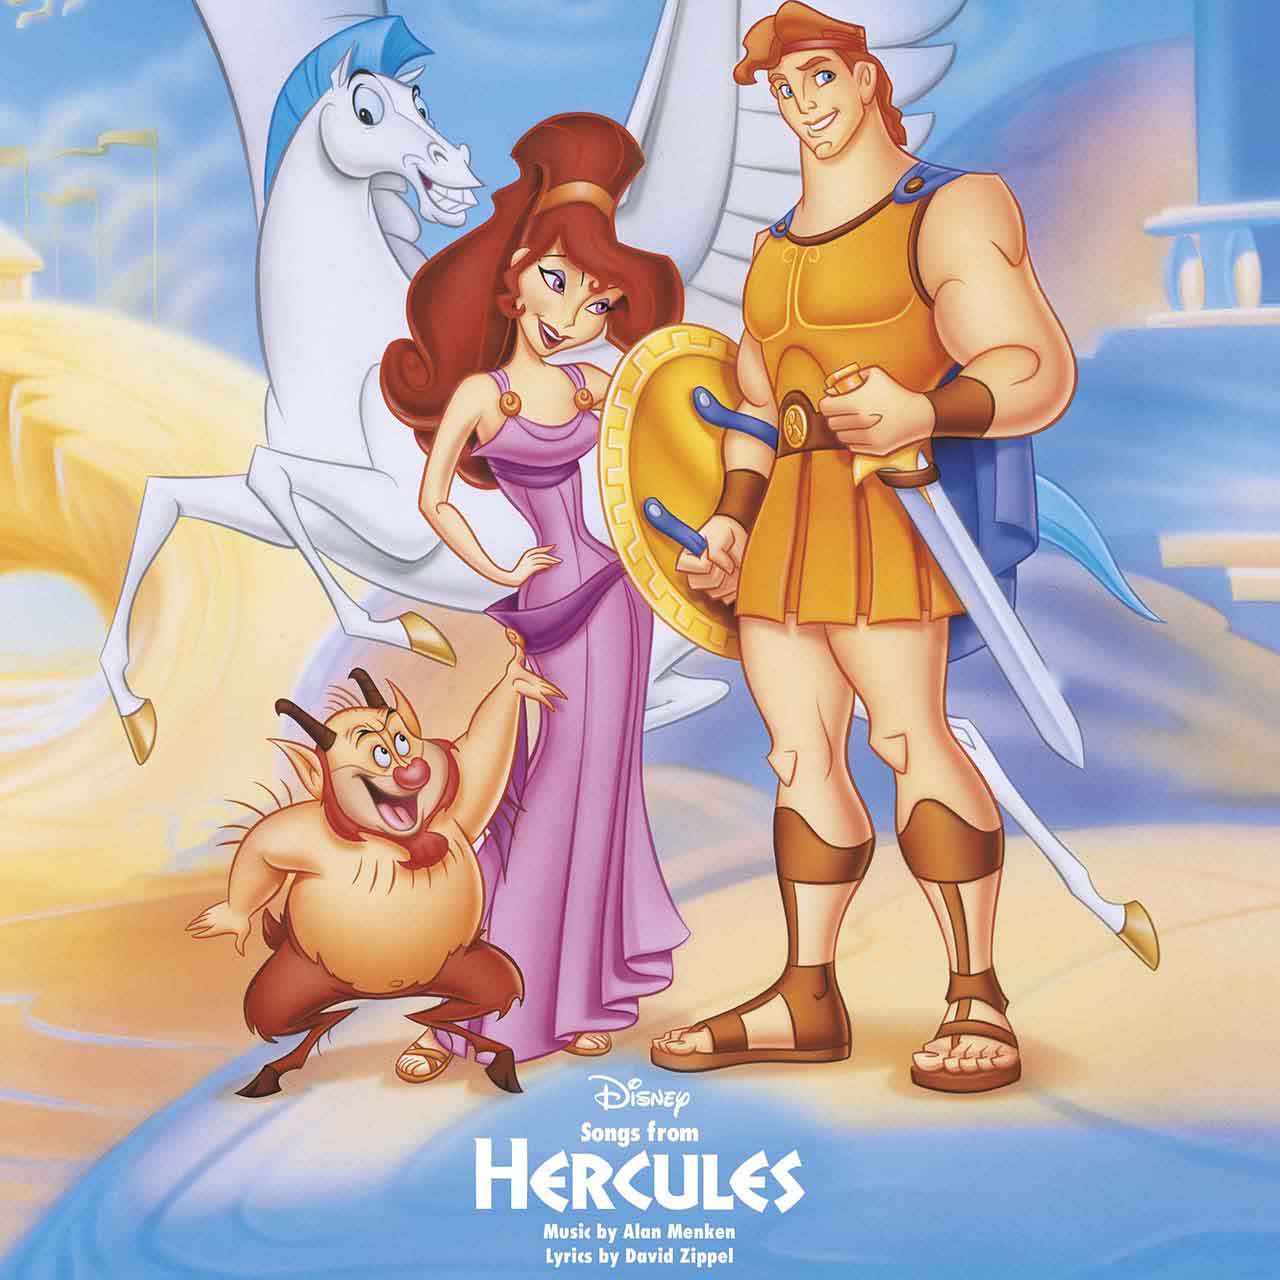 chris fredrich recommends Hercules Movie Free Download